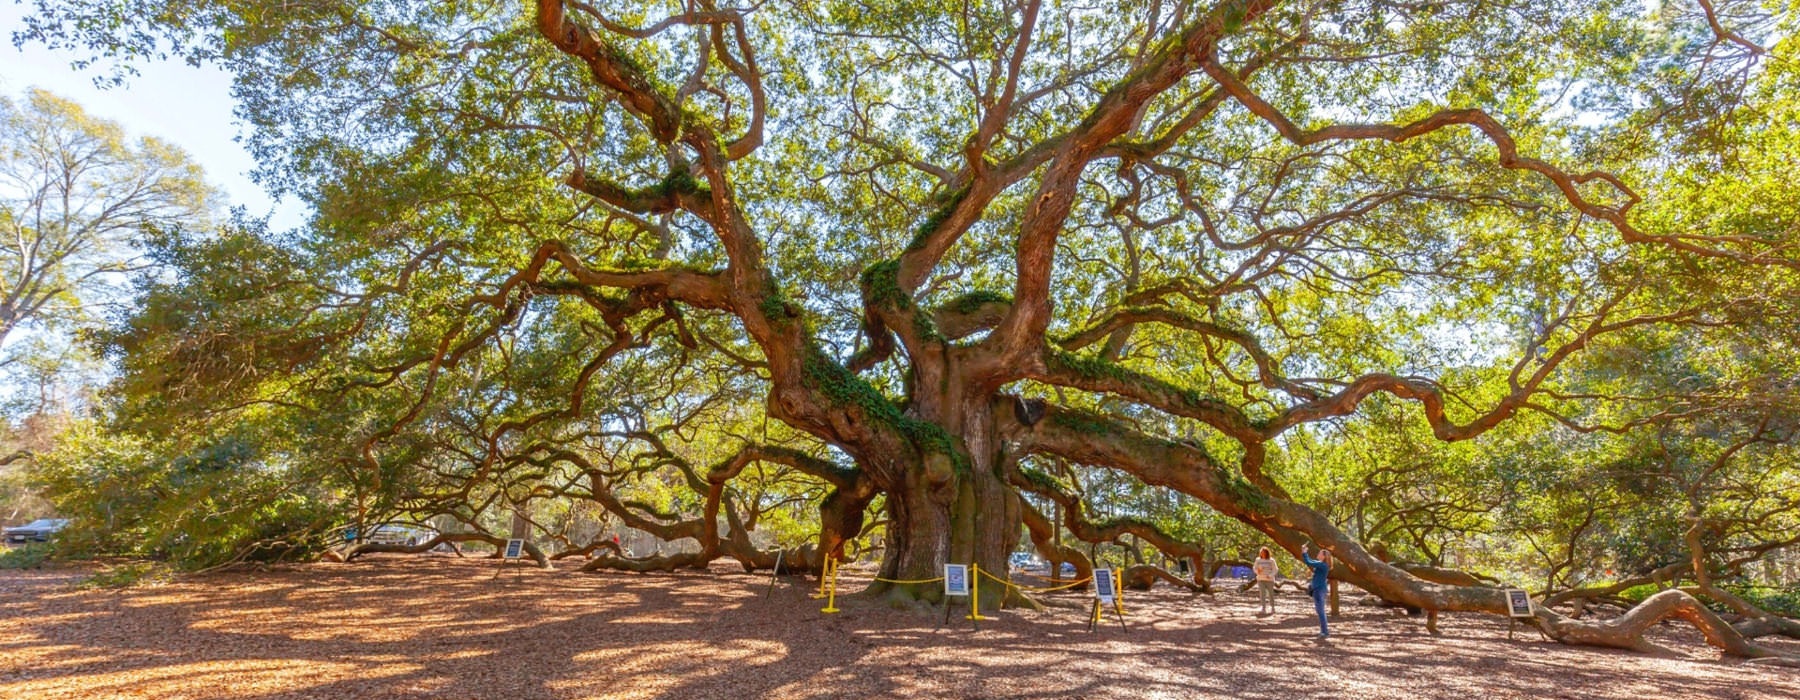 people stand next to massive tree in park